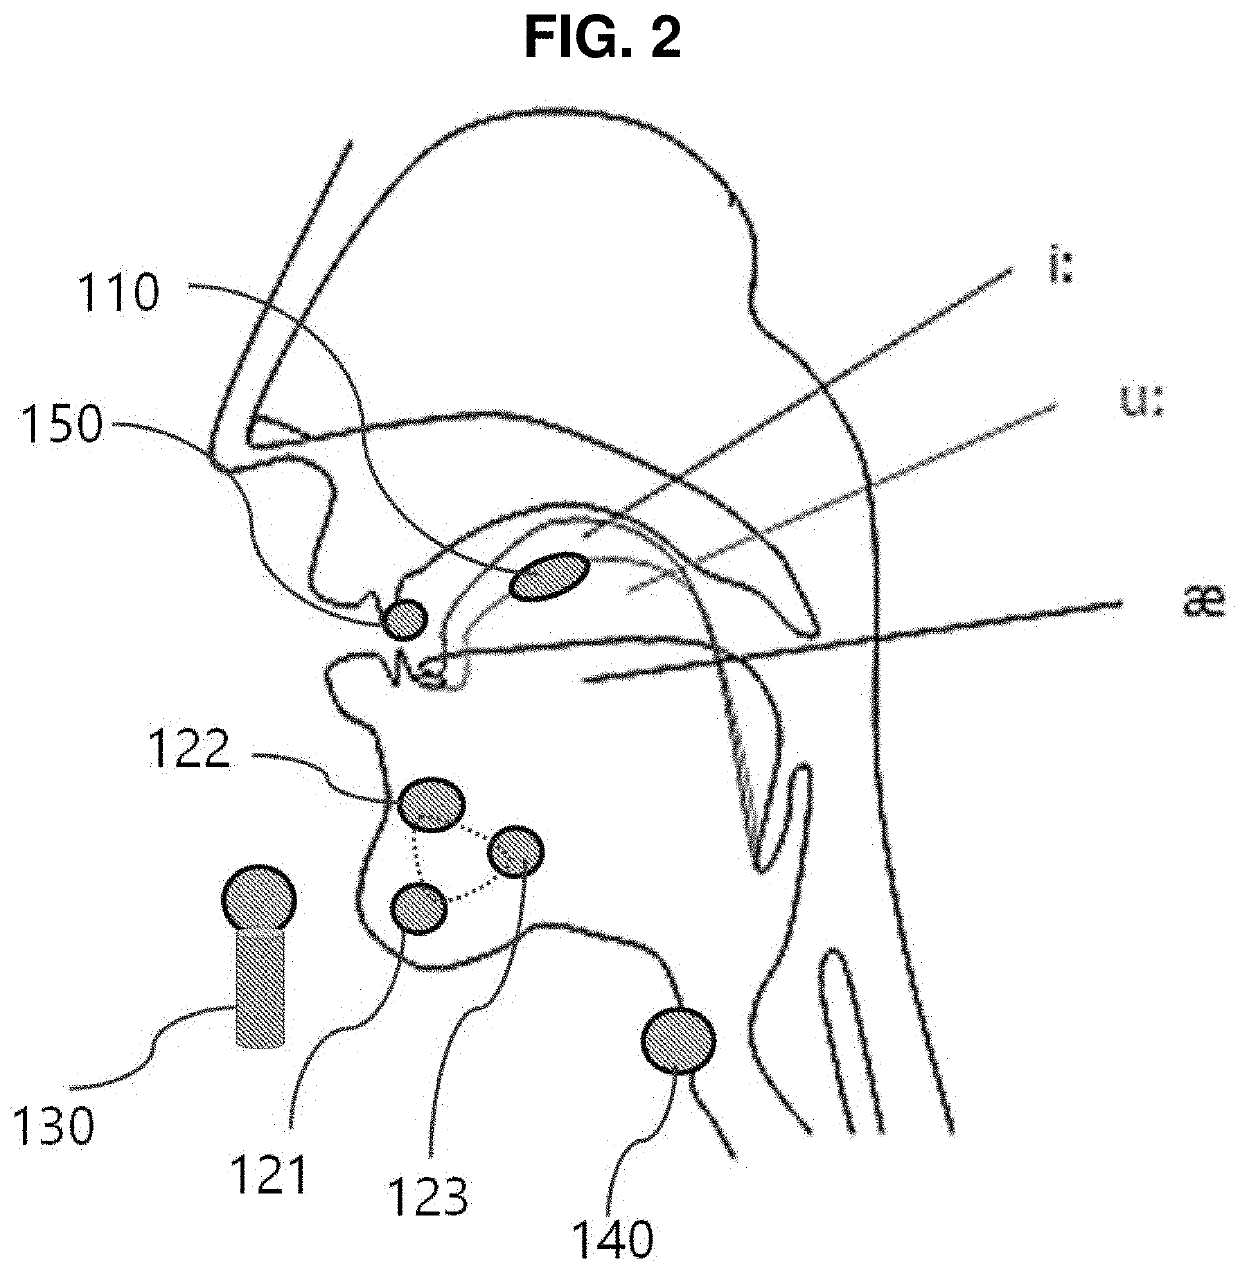 Speech intention expression system using physical characteristics of head and neck articulator